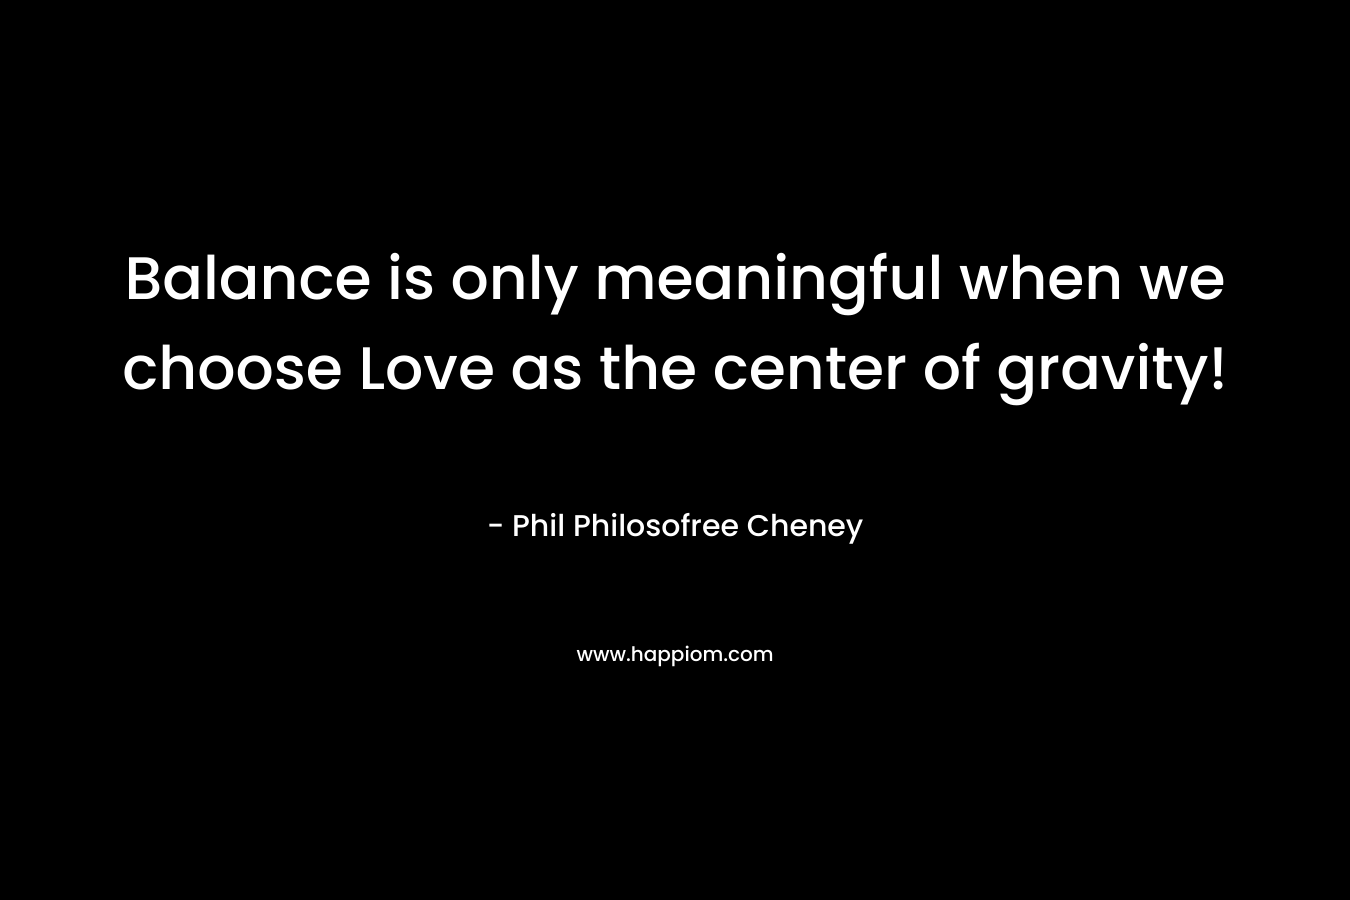 Balance is only meaningful when we choose Love as the center of gravity!